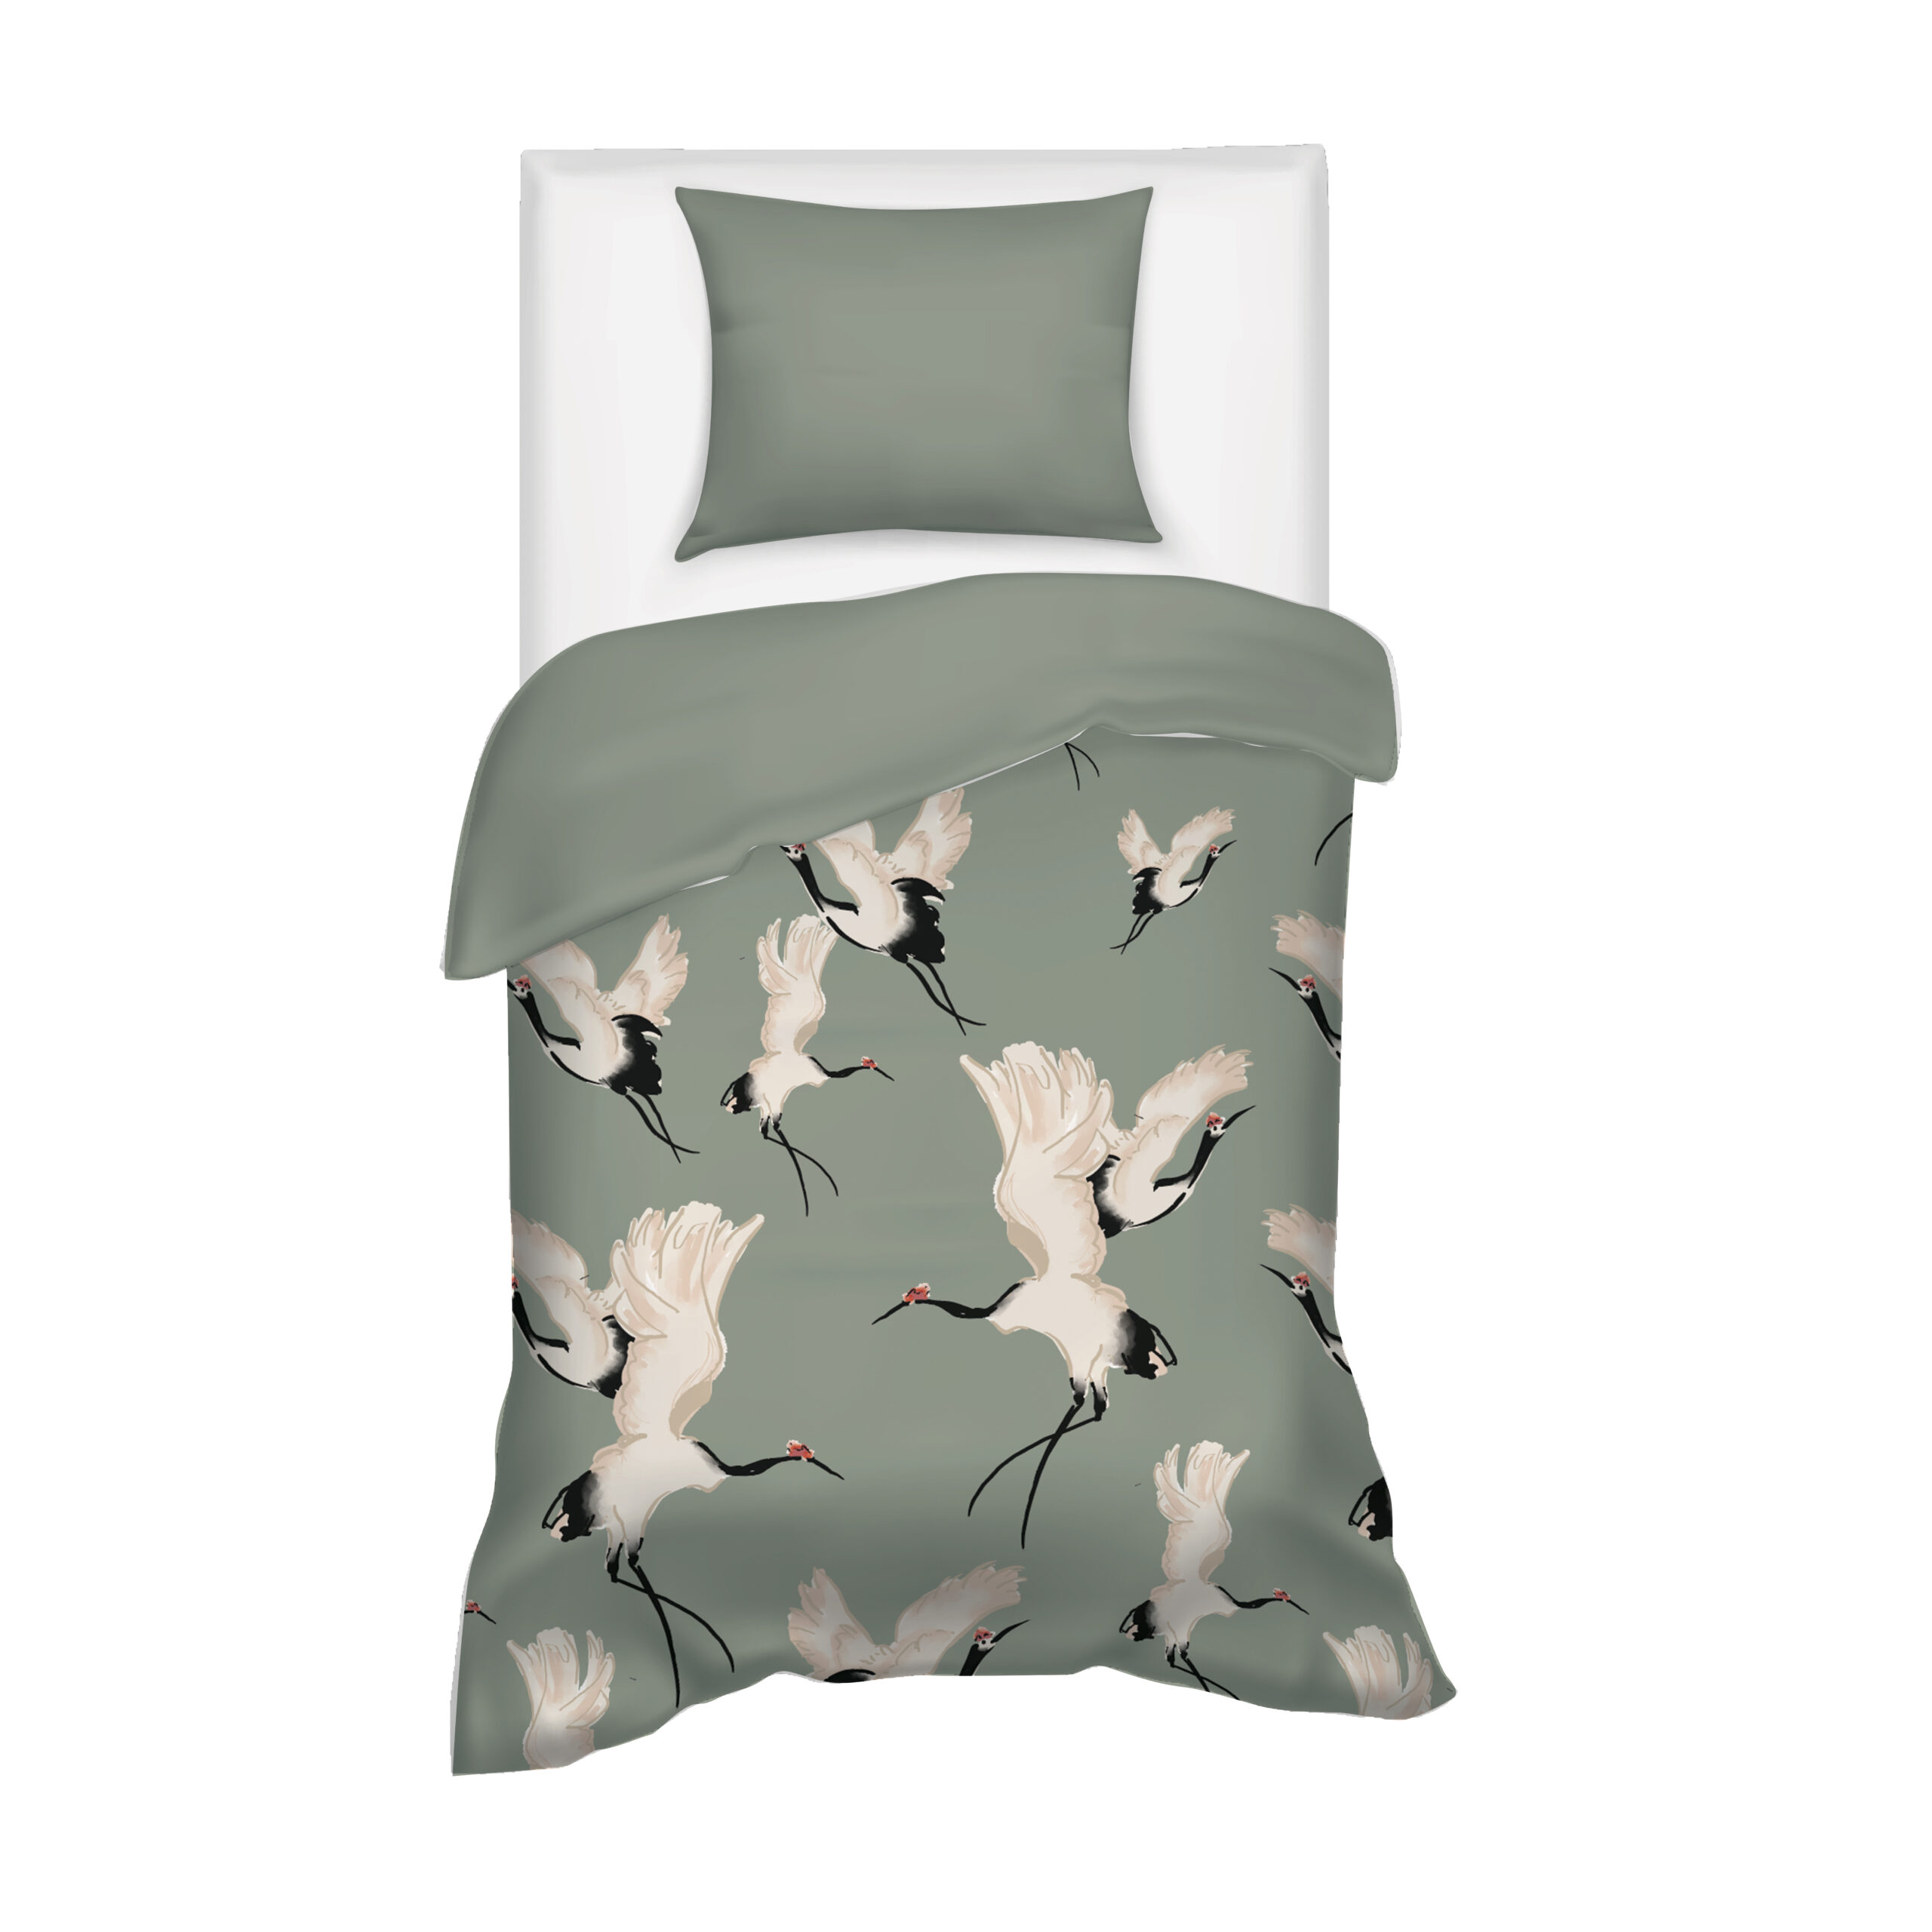 Villa Madelief 140 x 200cm Green White Cranes Printed Duvet Cover with 1 Pillowcase